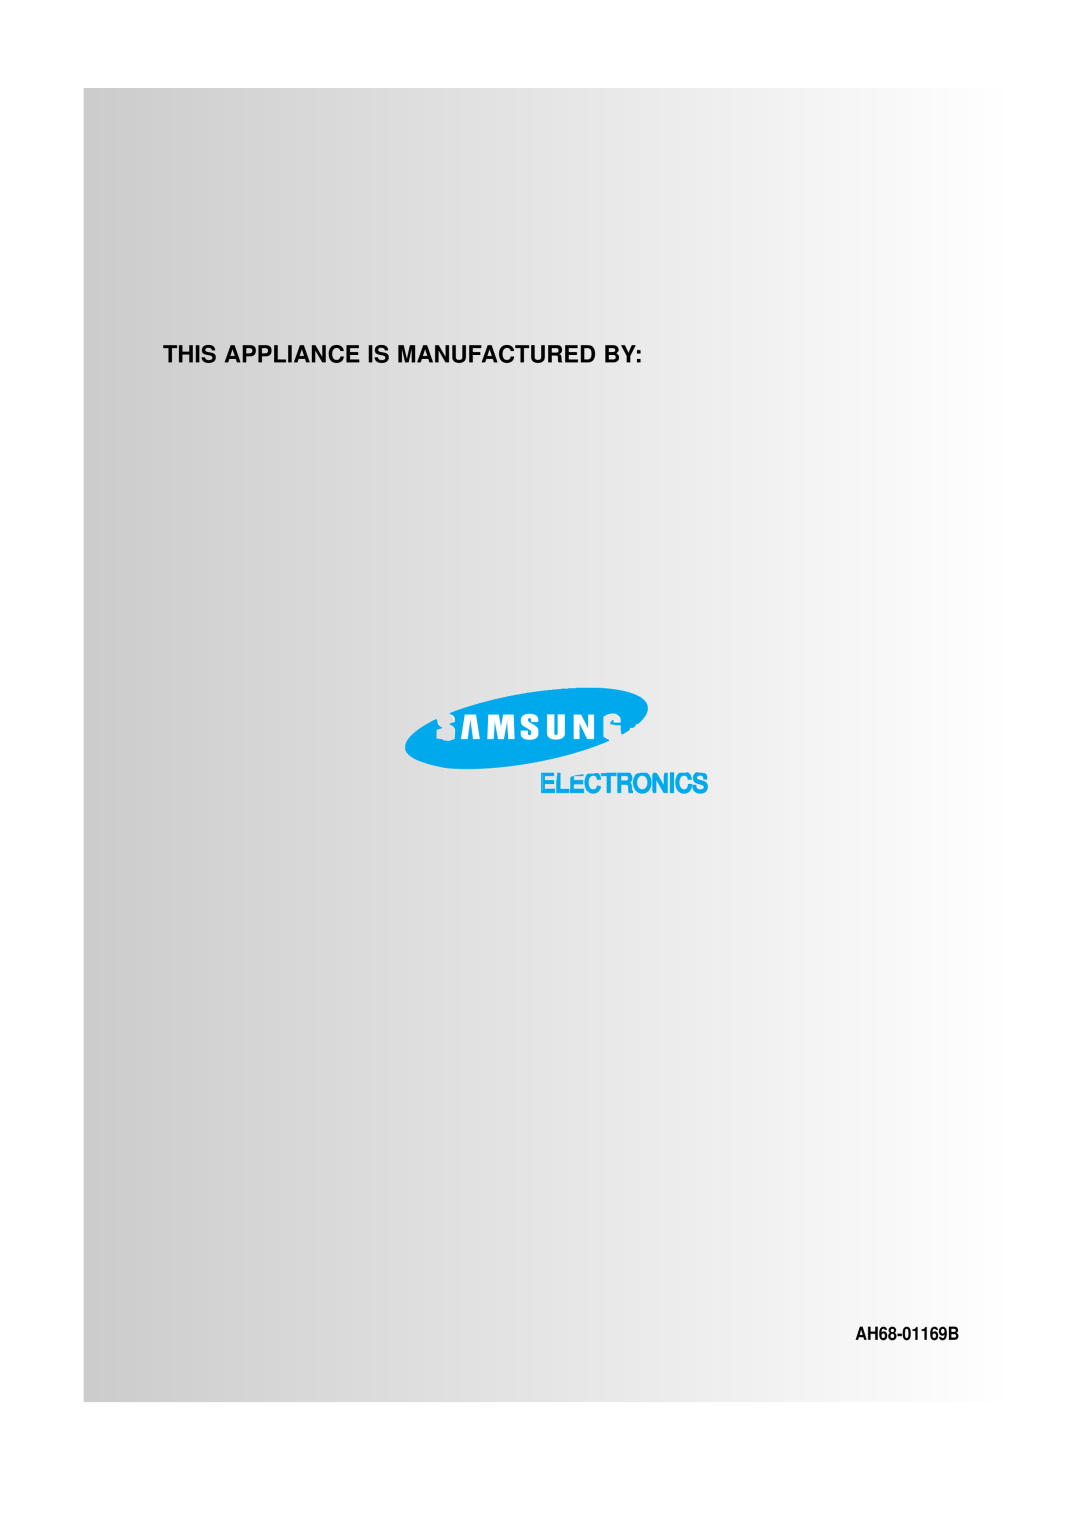 Samsung EV-1S instruction manual AH68-01169B, Electronics, This Appliance Is Manufactured By 